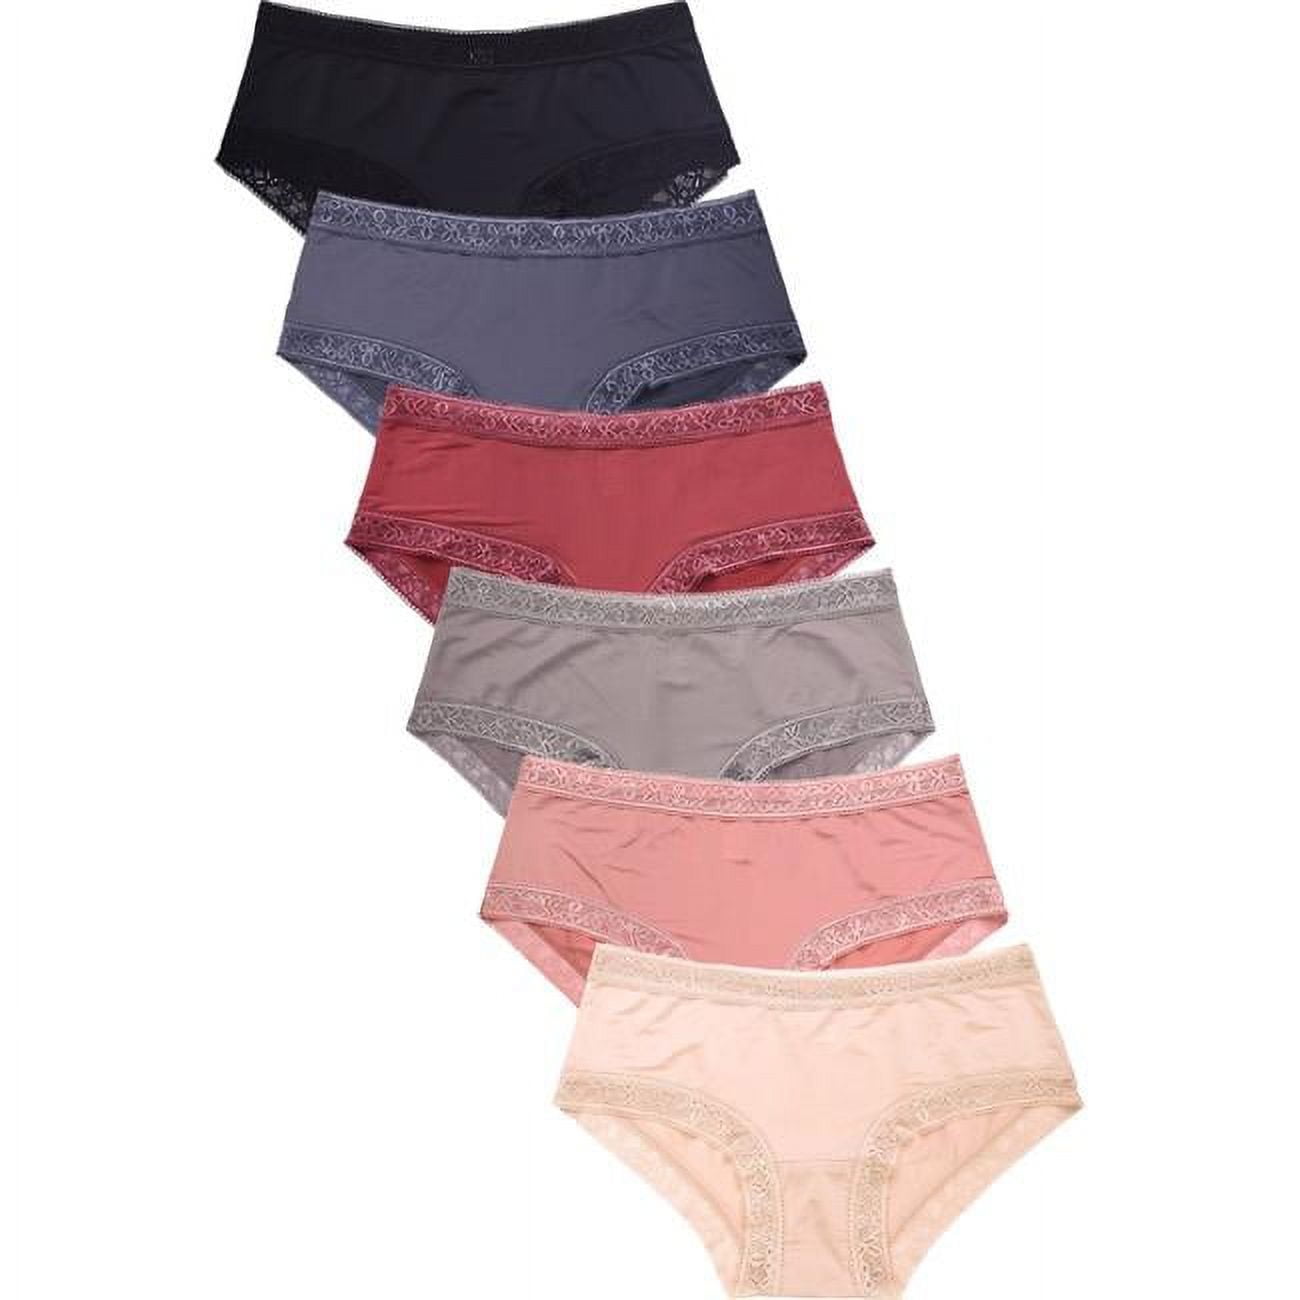 247 Frenzy Women's Essentials PACK OF 6 Cotton Stretch Bikini Panty  Underwear with Extended Side Seams LP1379CKE Size SM at  Women's  Clothing store